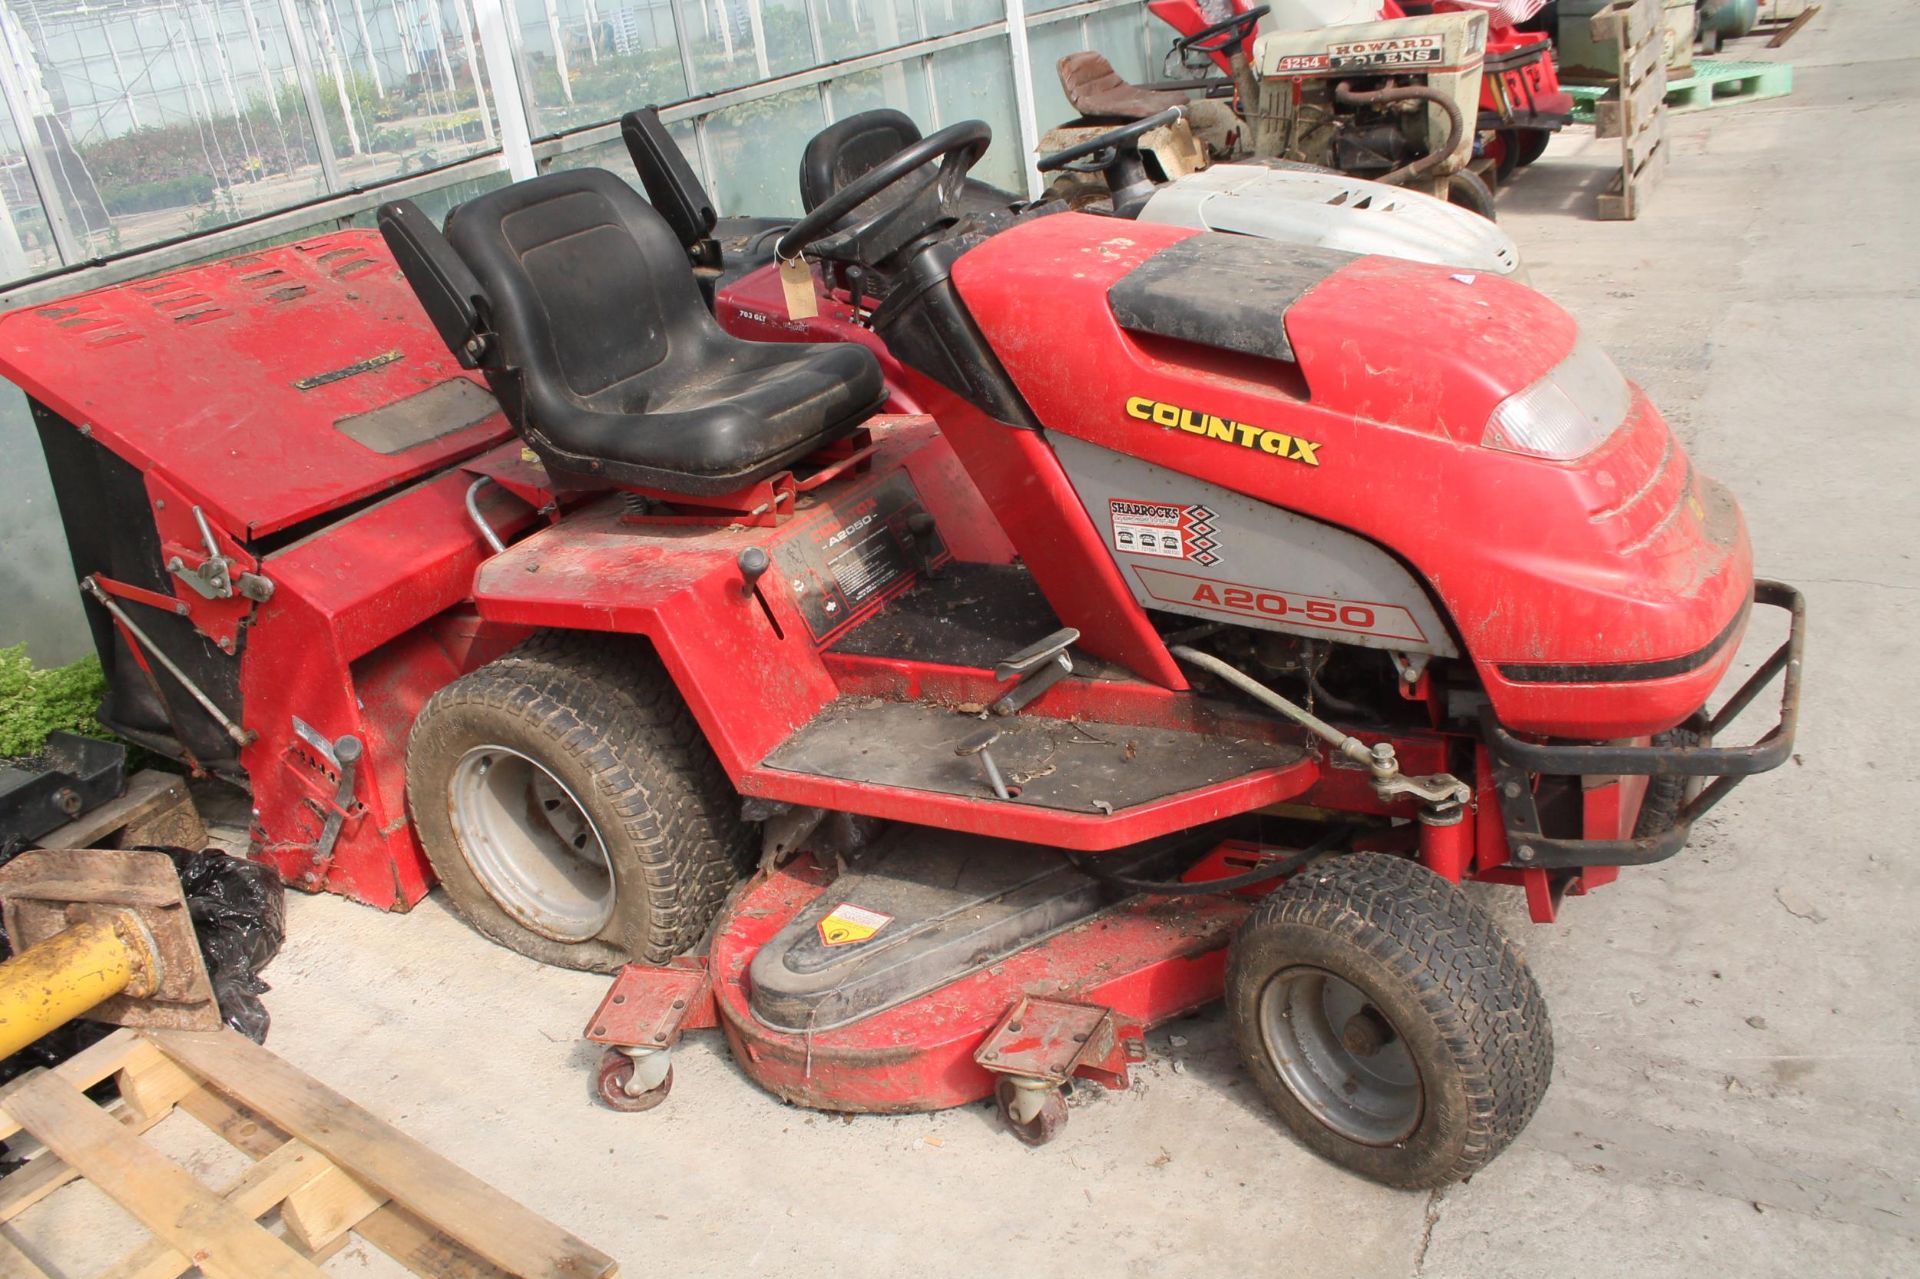 A COUNTAX A20-50 RIDE ON LAWNMOWER COMPLETE WITH GRASS BOX WITH ATTATCHED ROLLER NO VAT - Image 2 of 3